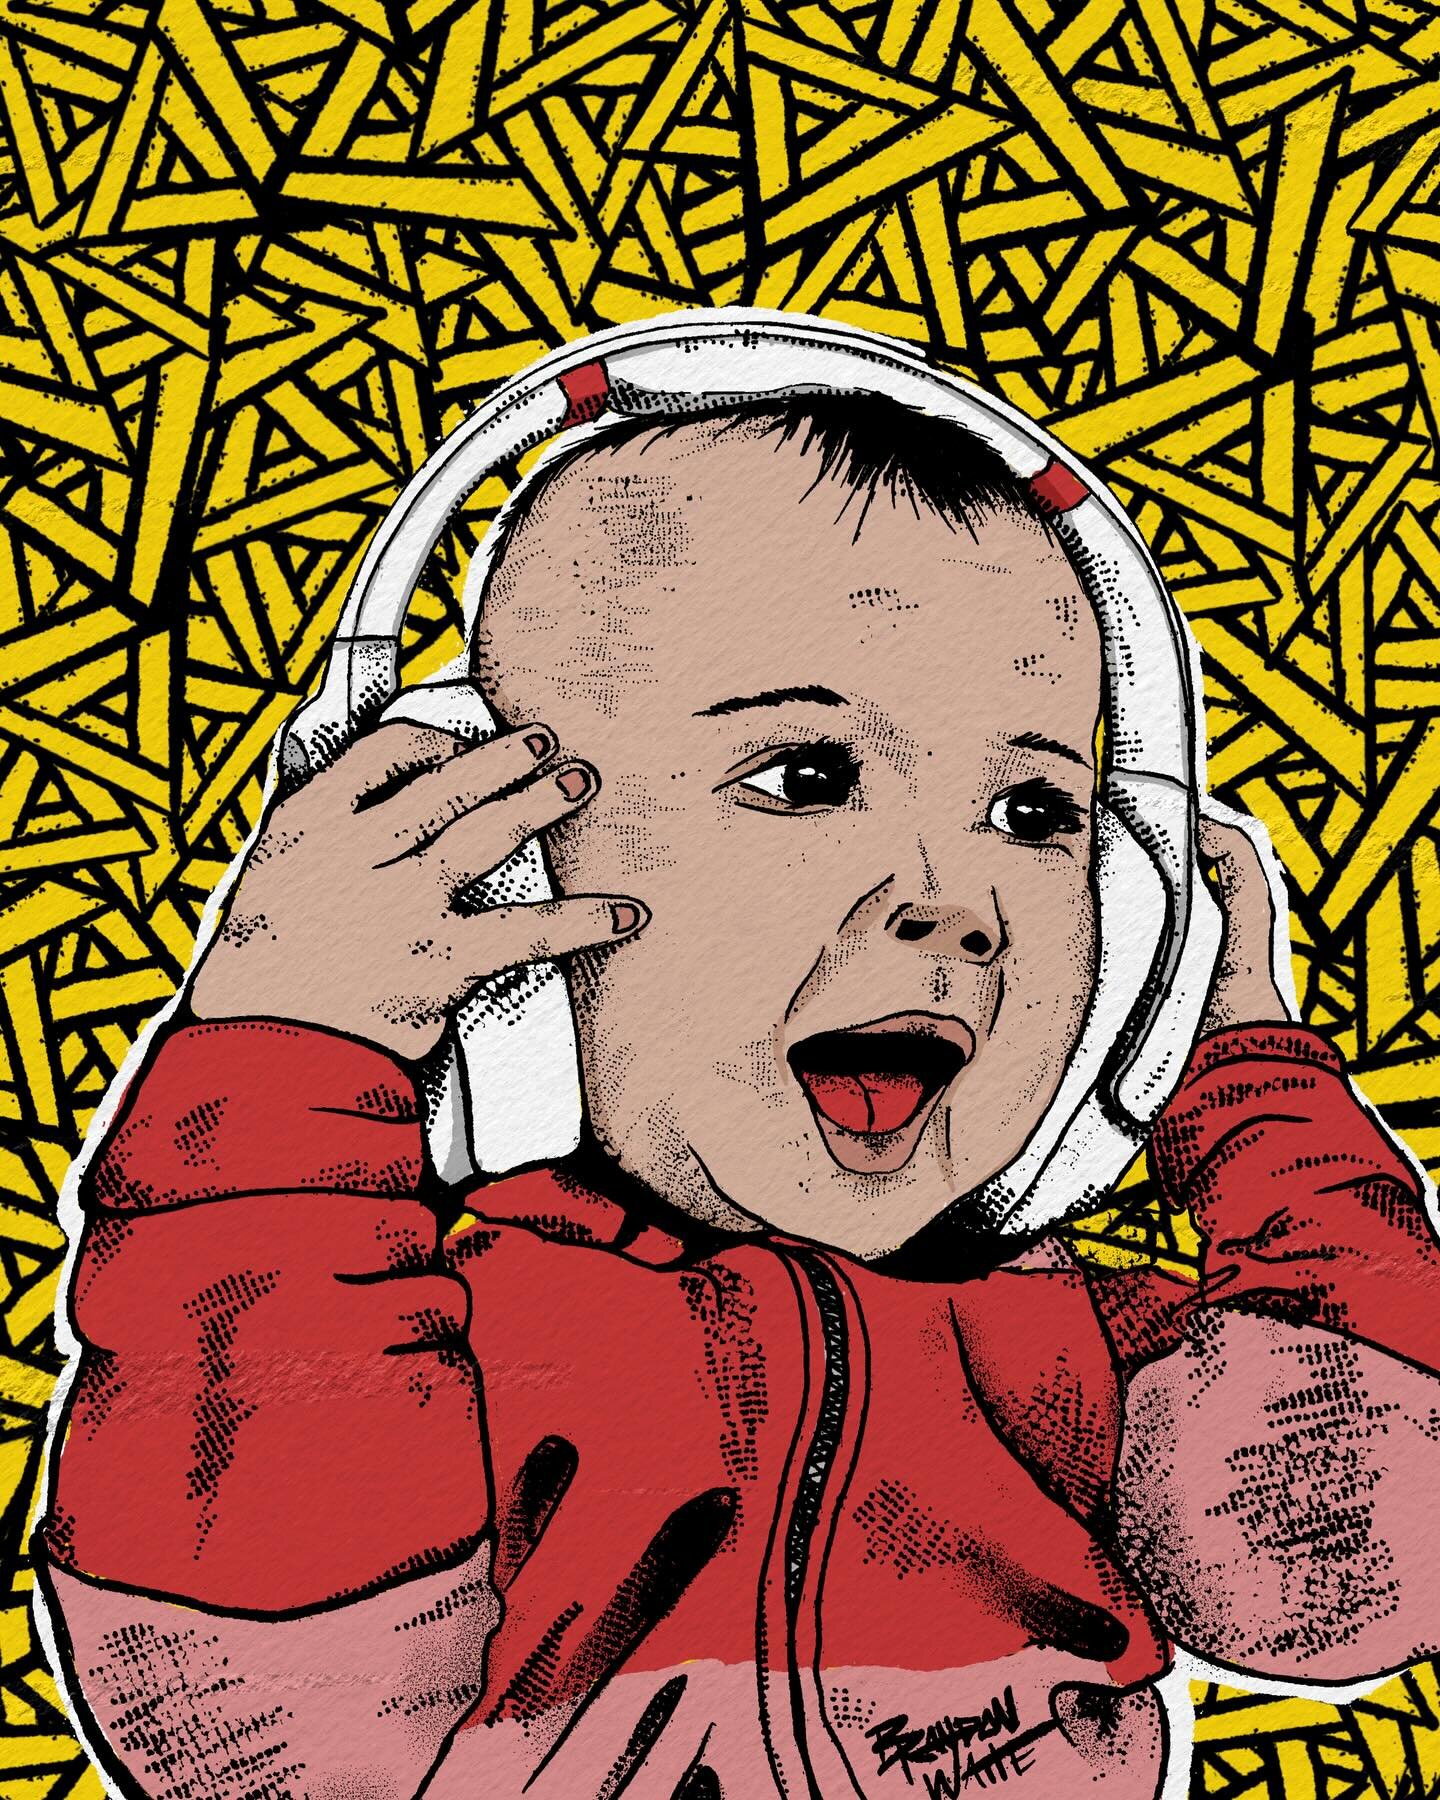 Latest digital portrait of my daughter Ivy rocking out with some headphones. Continuing my exploration of grungy pen and ink and flat colors. 

#portrait #illustration #procreate #brandonwaite